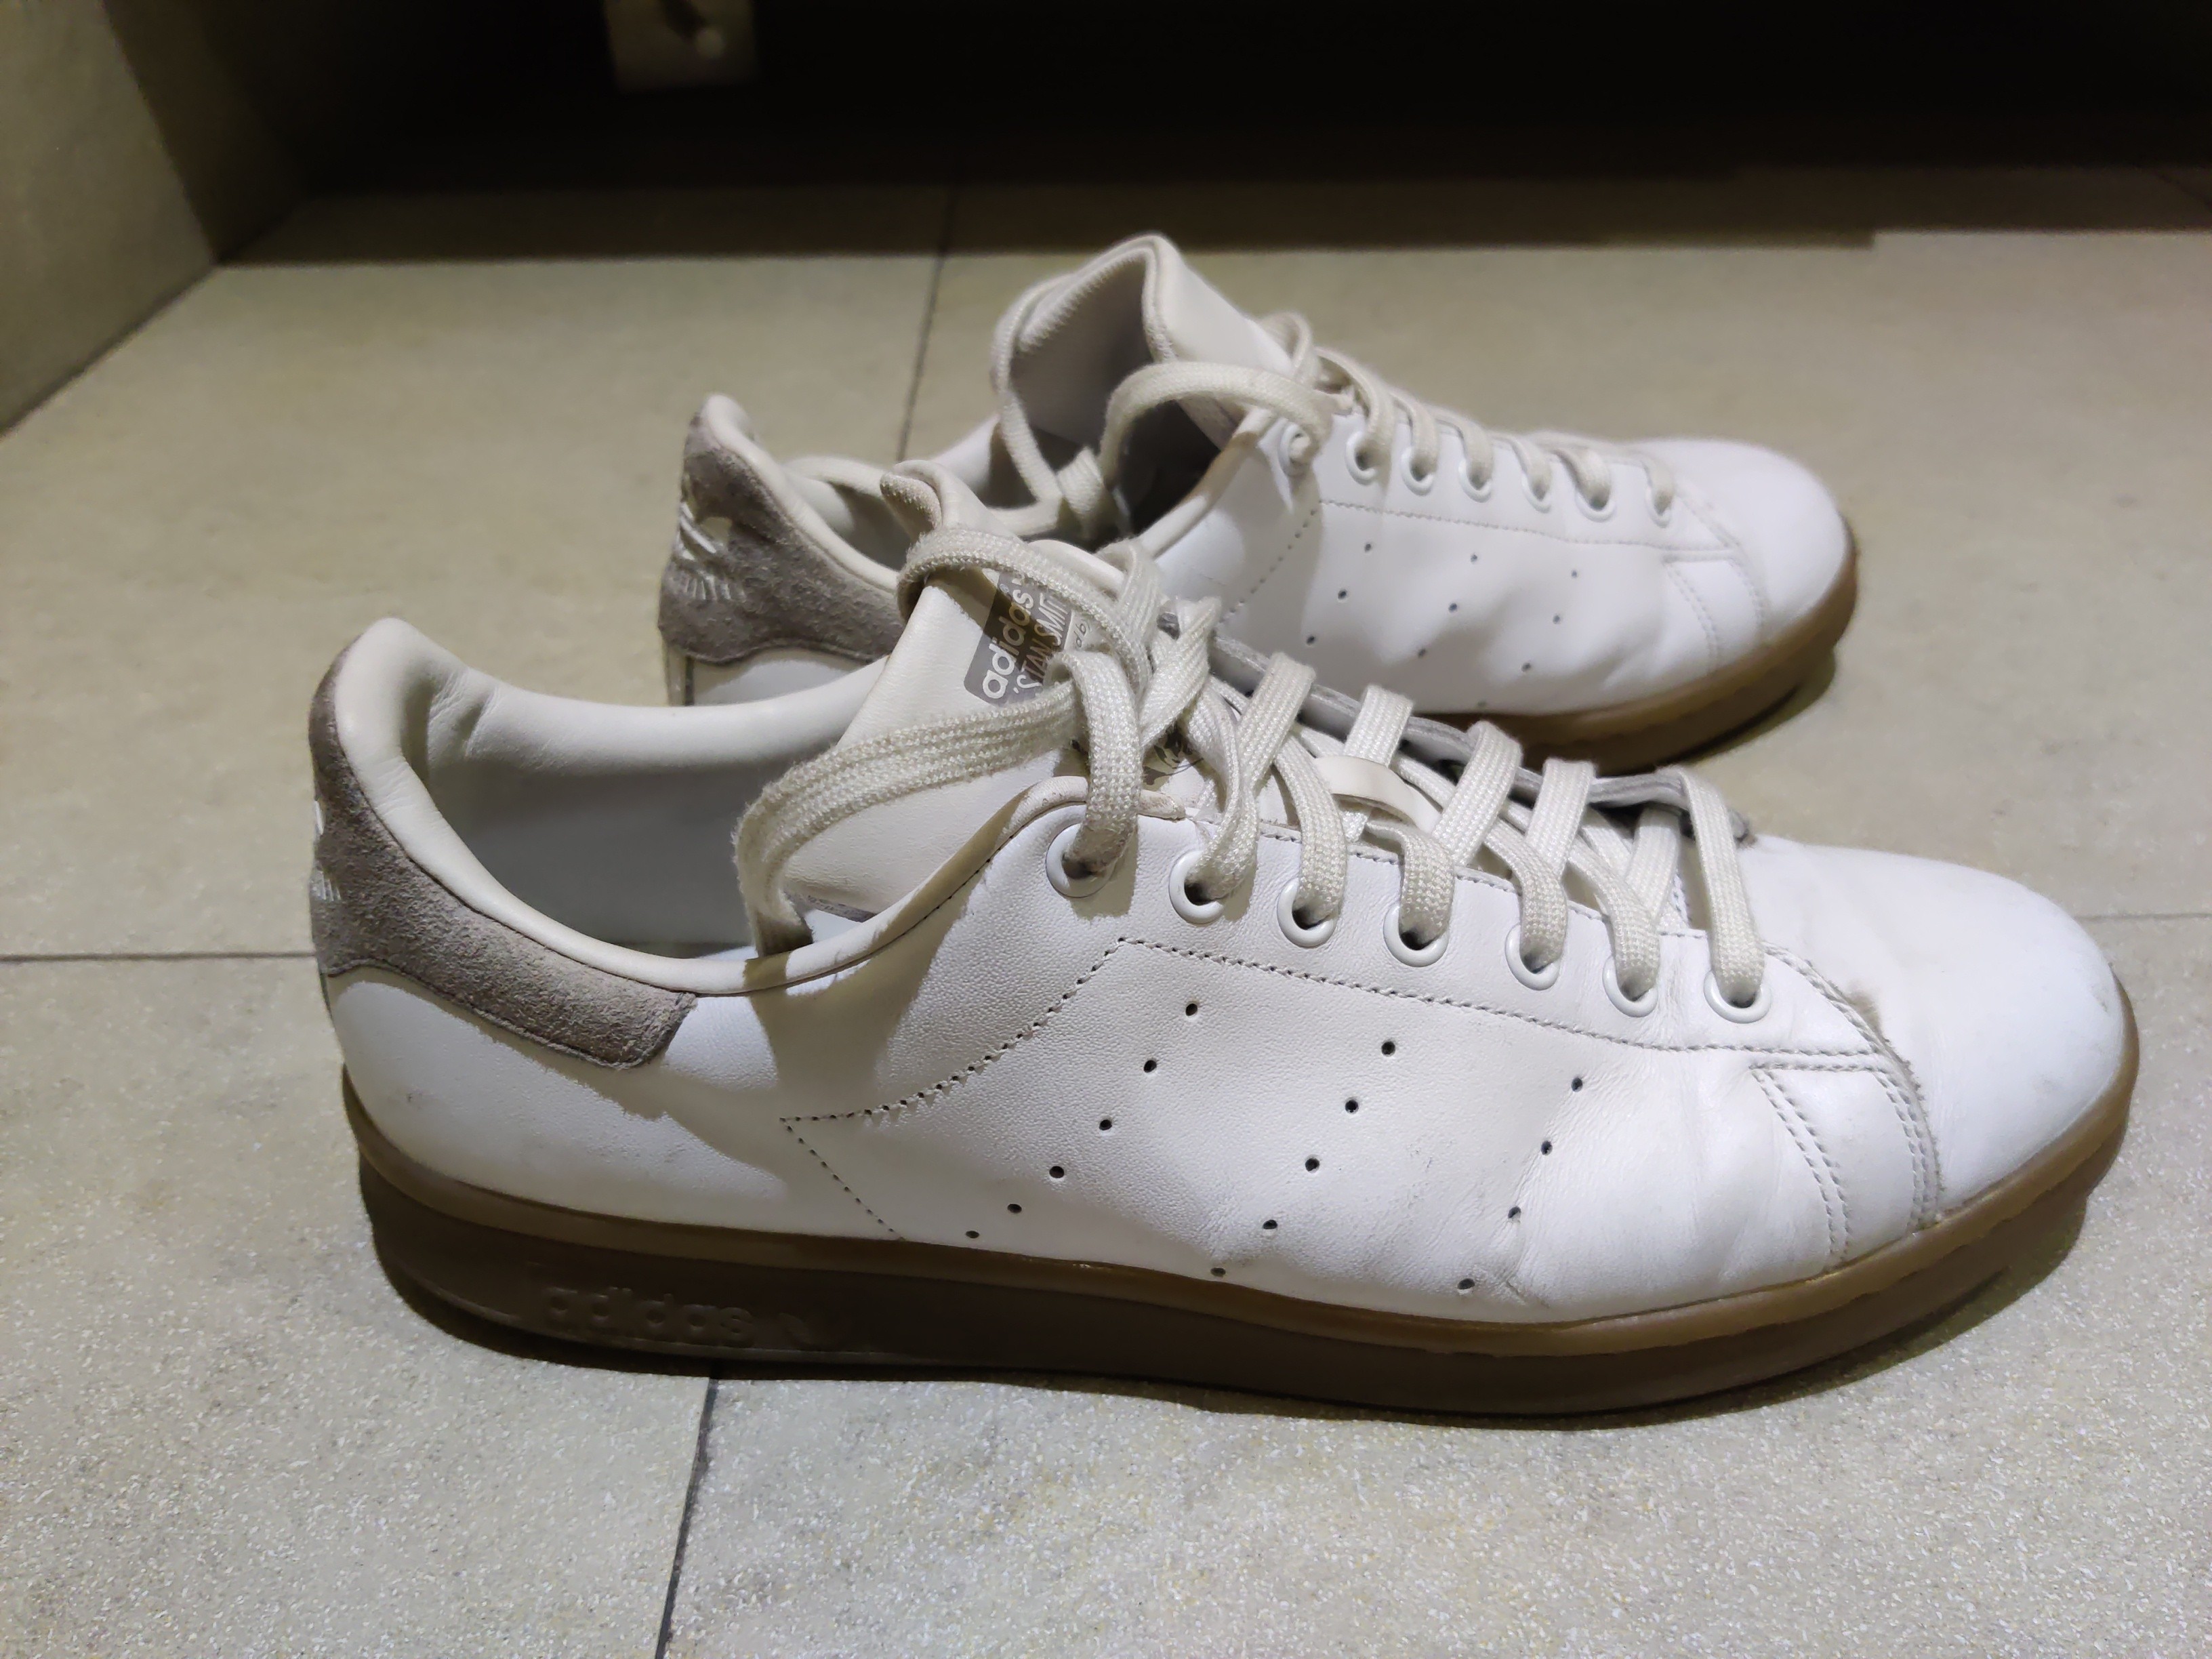 Adidas Stan Smith with gum sole, Men's Fashion, Footwear, Sneakers on ...